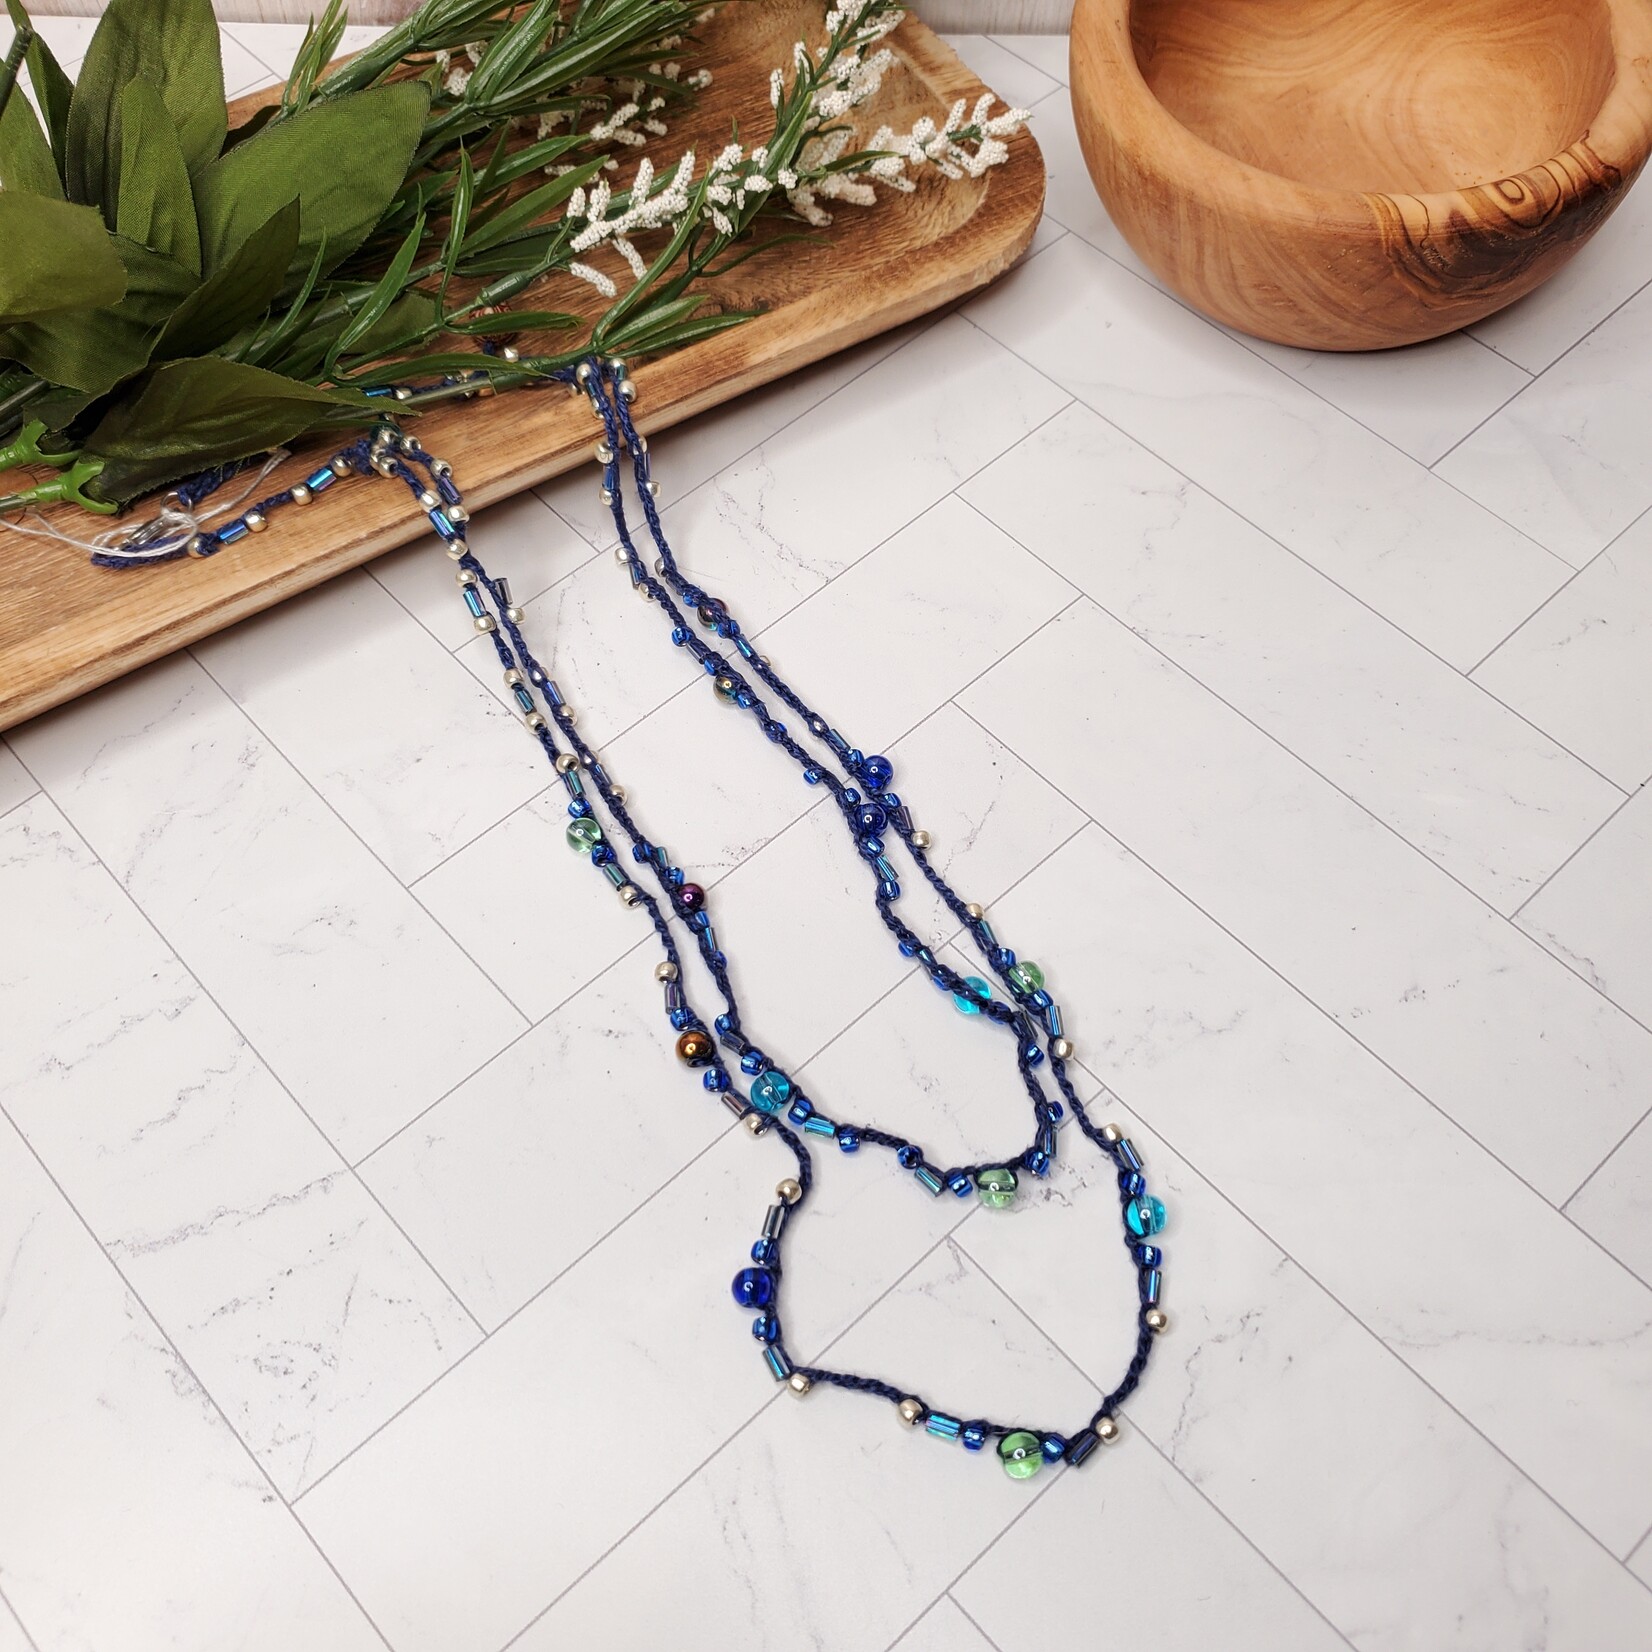 Crescent Moon Jewelry of the Sierras Bead Crochet Double Necklace - Dark Blue & Silver - 28"